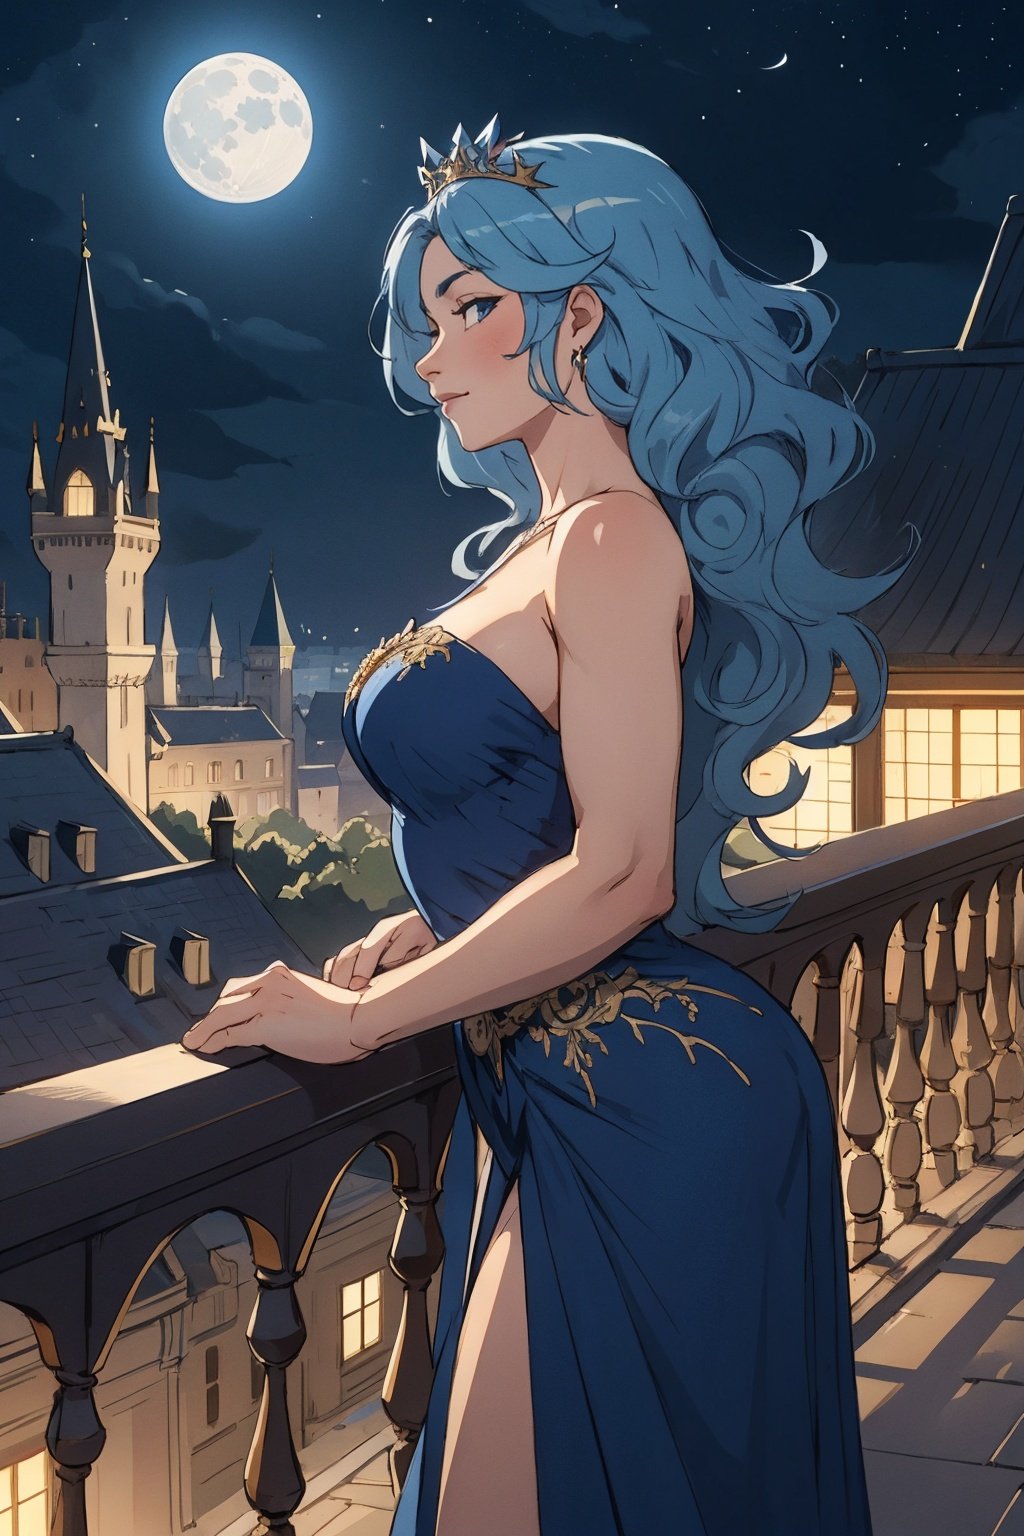 Masterpiece, best quality, official art, artistation, Best artist, 1woman, a queen looking at the city from a balcony, Castle ground, blue hair, shiny hair, wavy hair, tiara, intricate dress, night sky, moon, from side, extremely detailed, cute, femenine. 